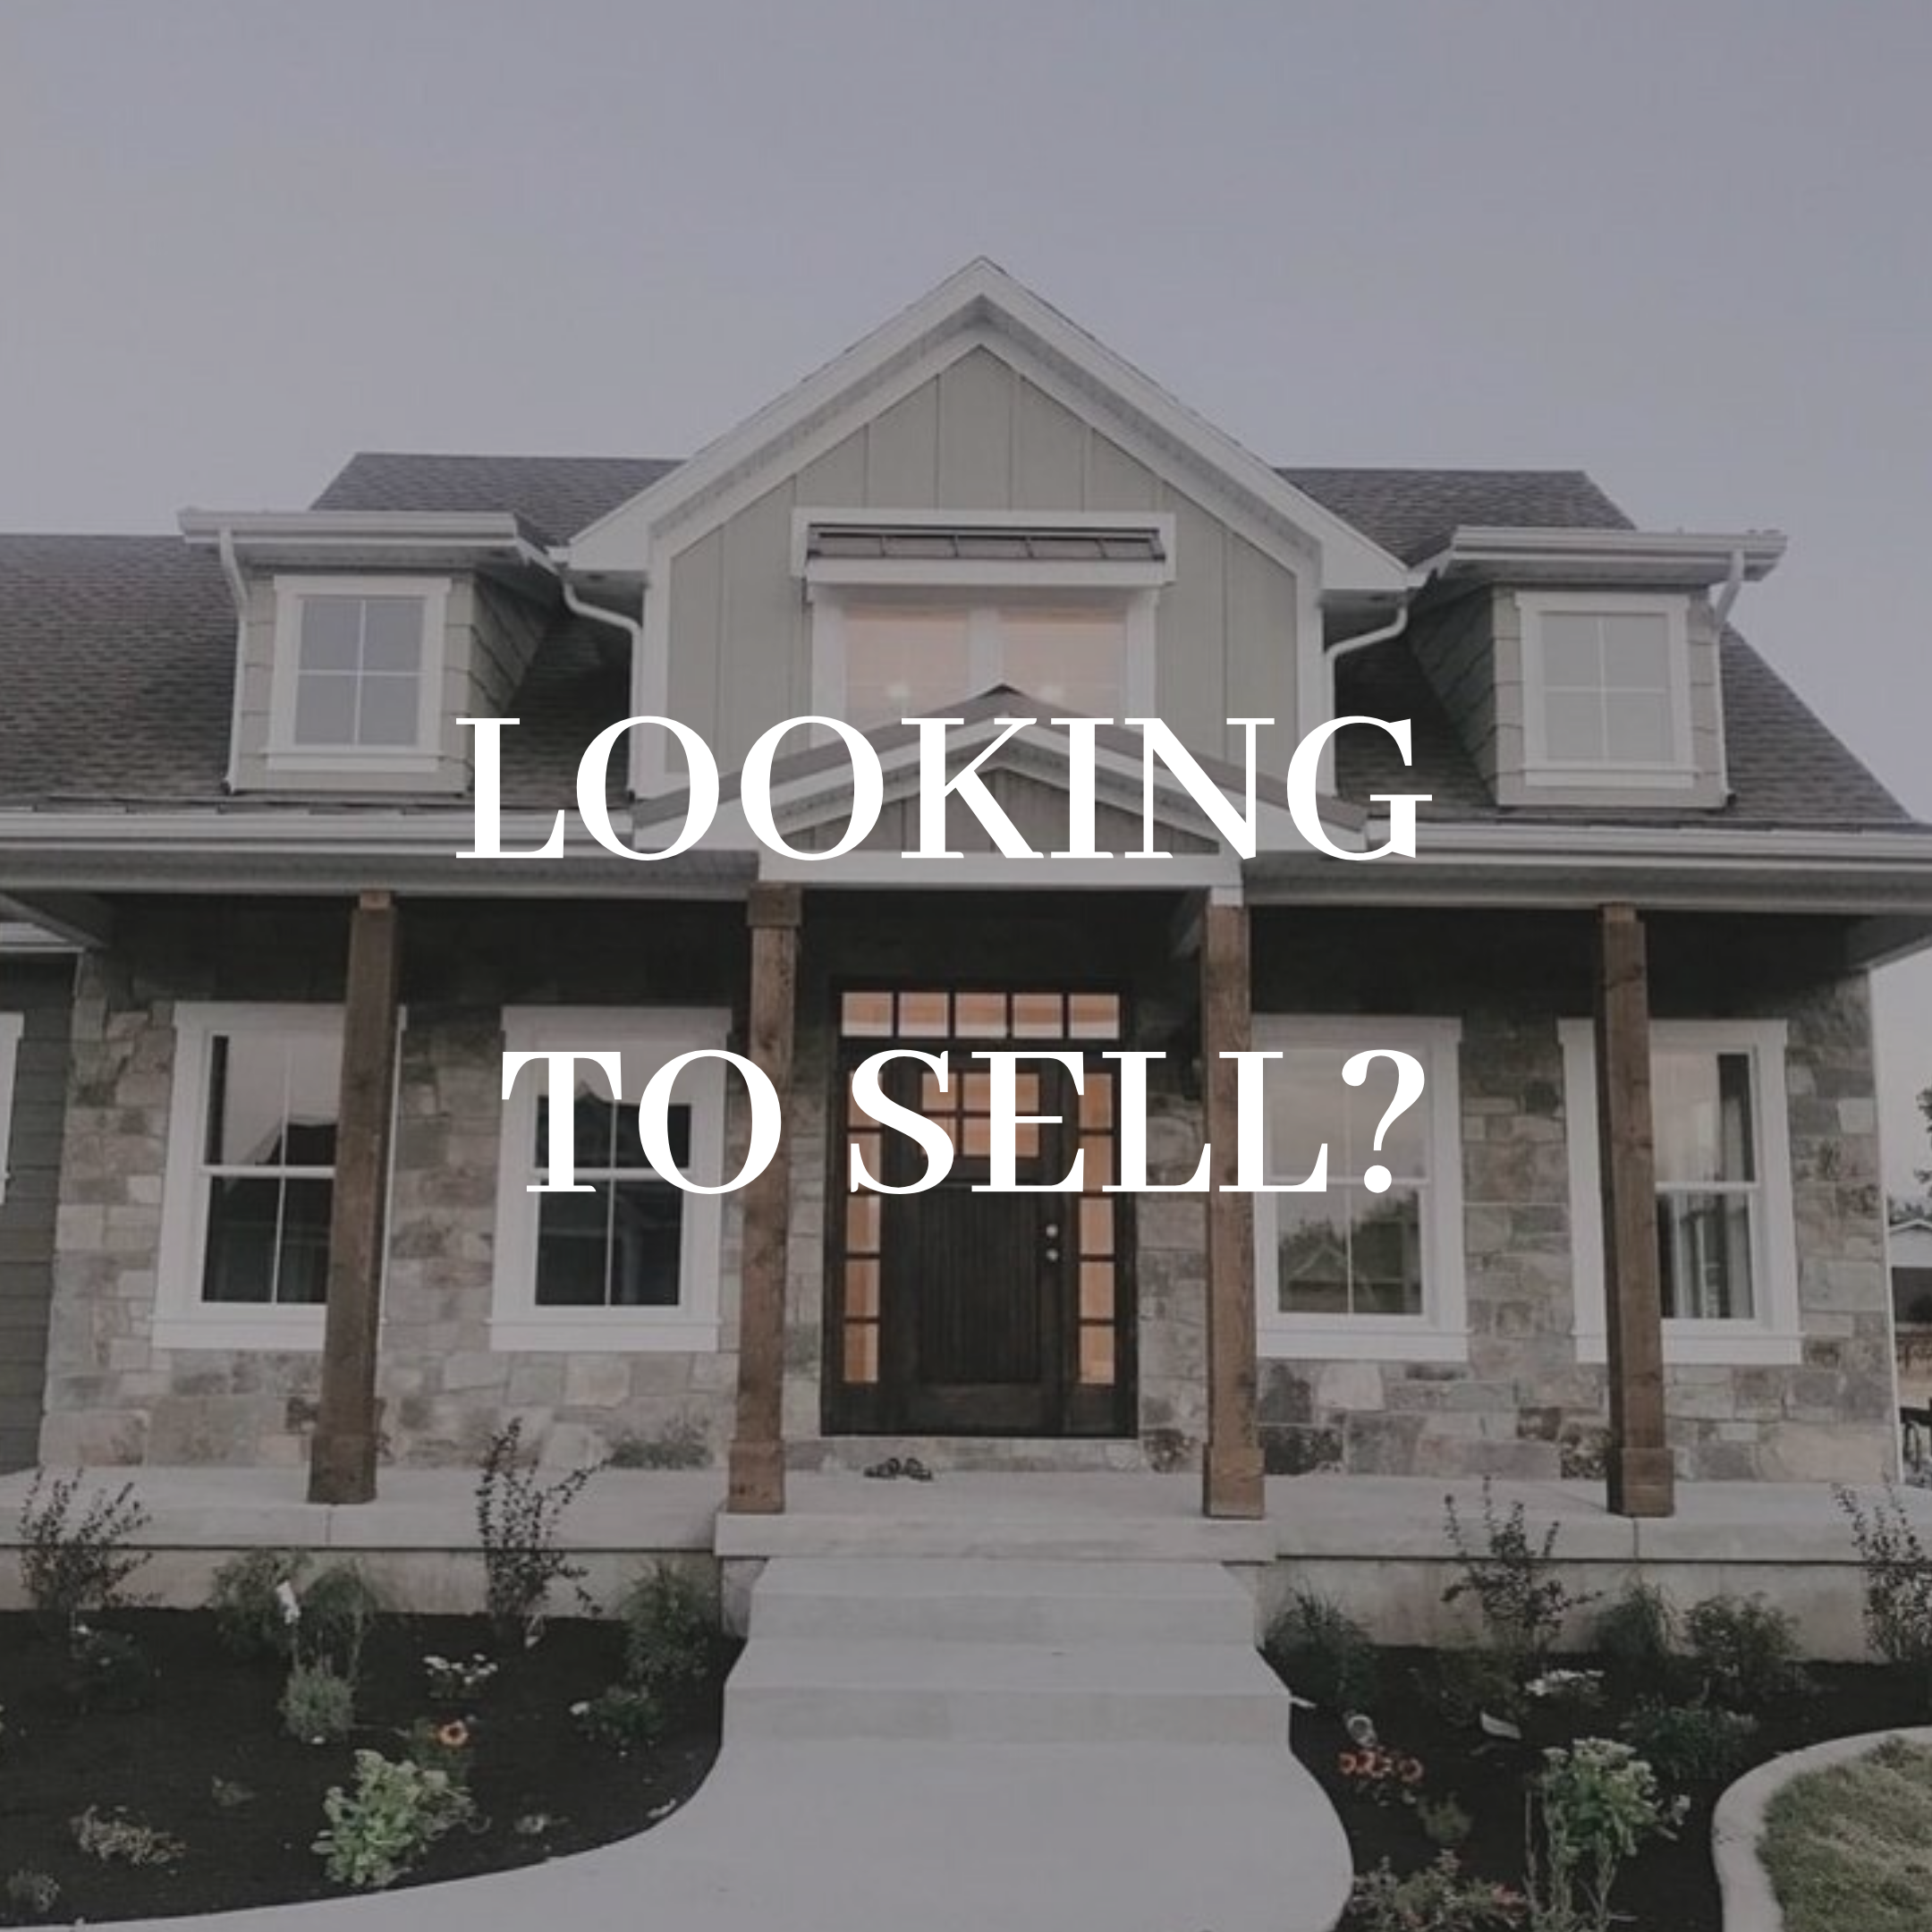 LOOKING TO SELL?